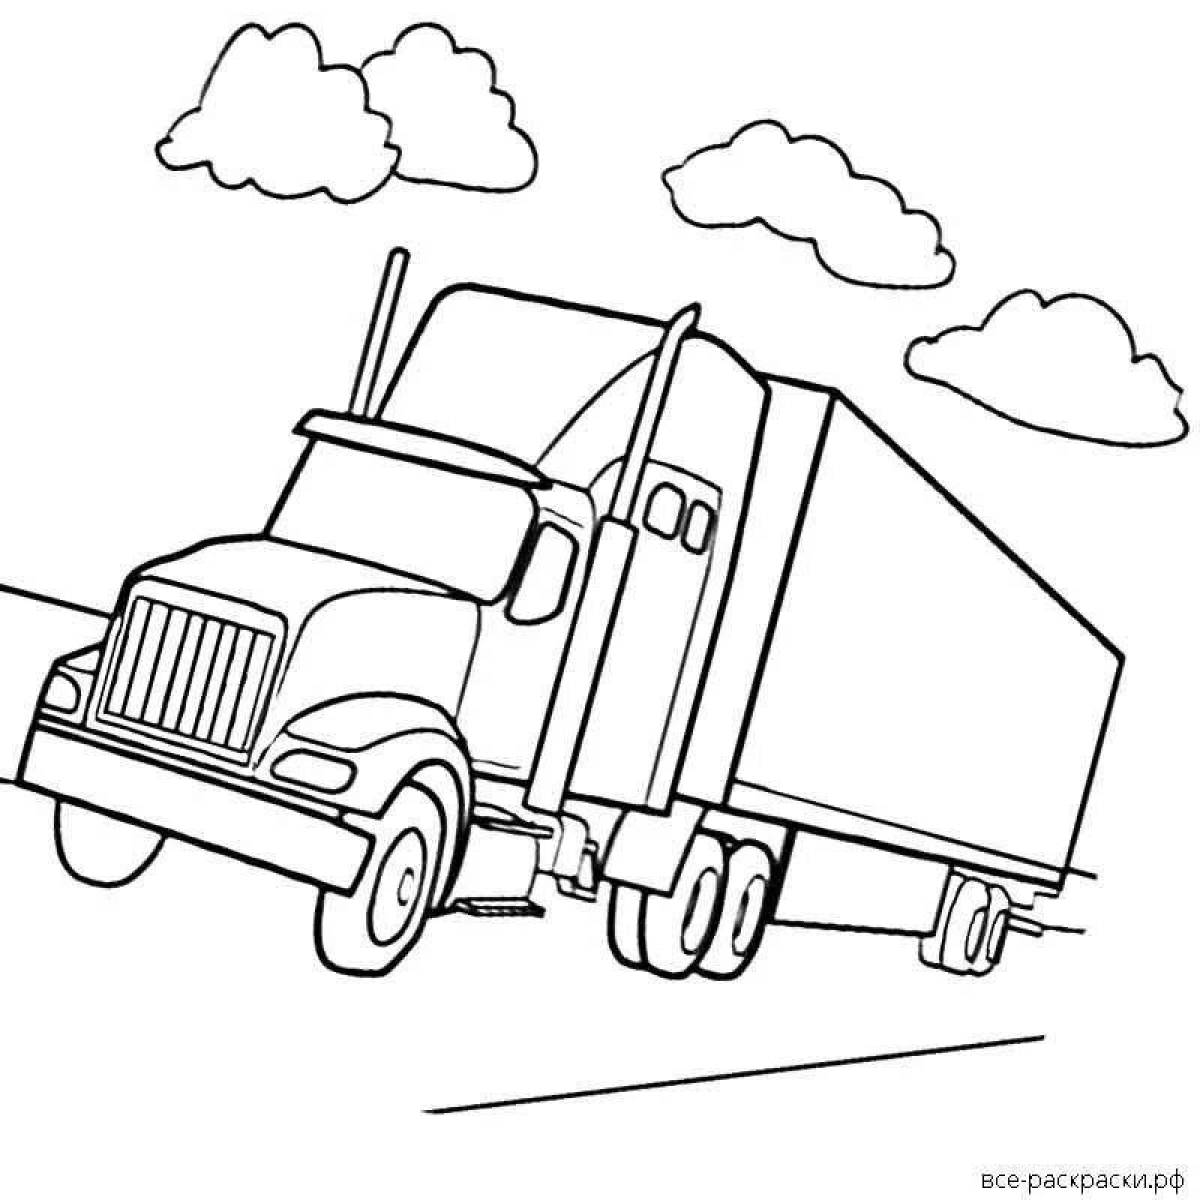 Adorable trailer coloring page